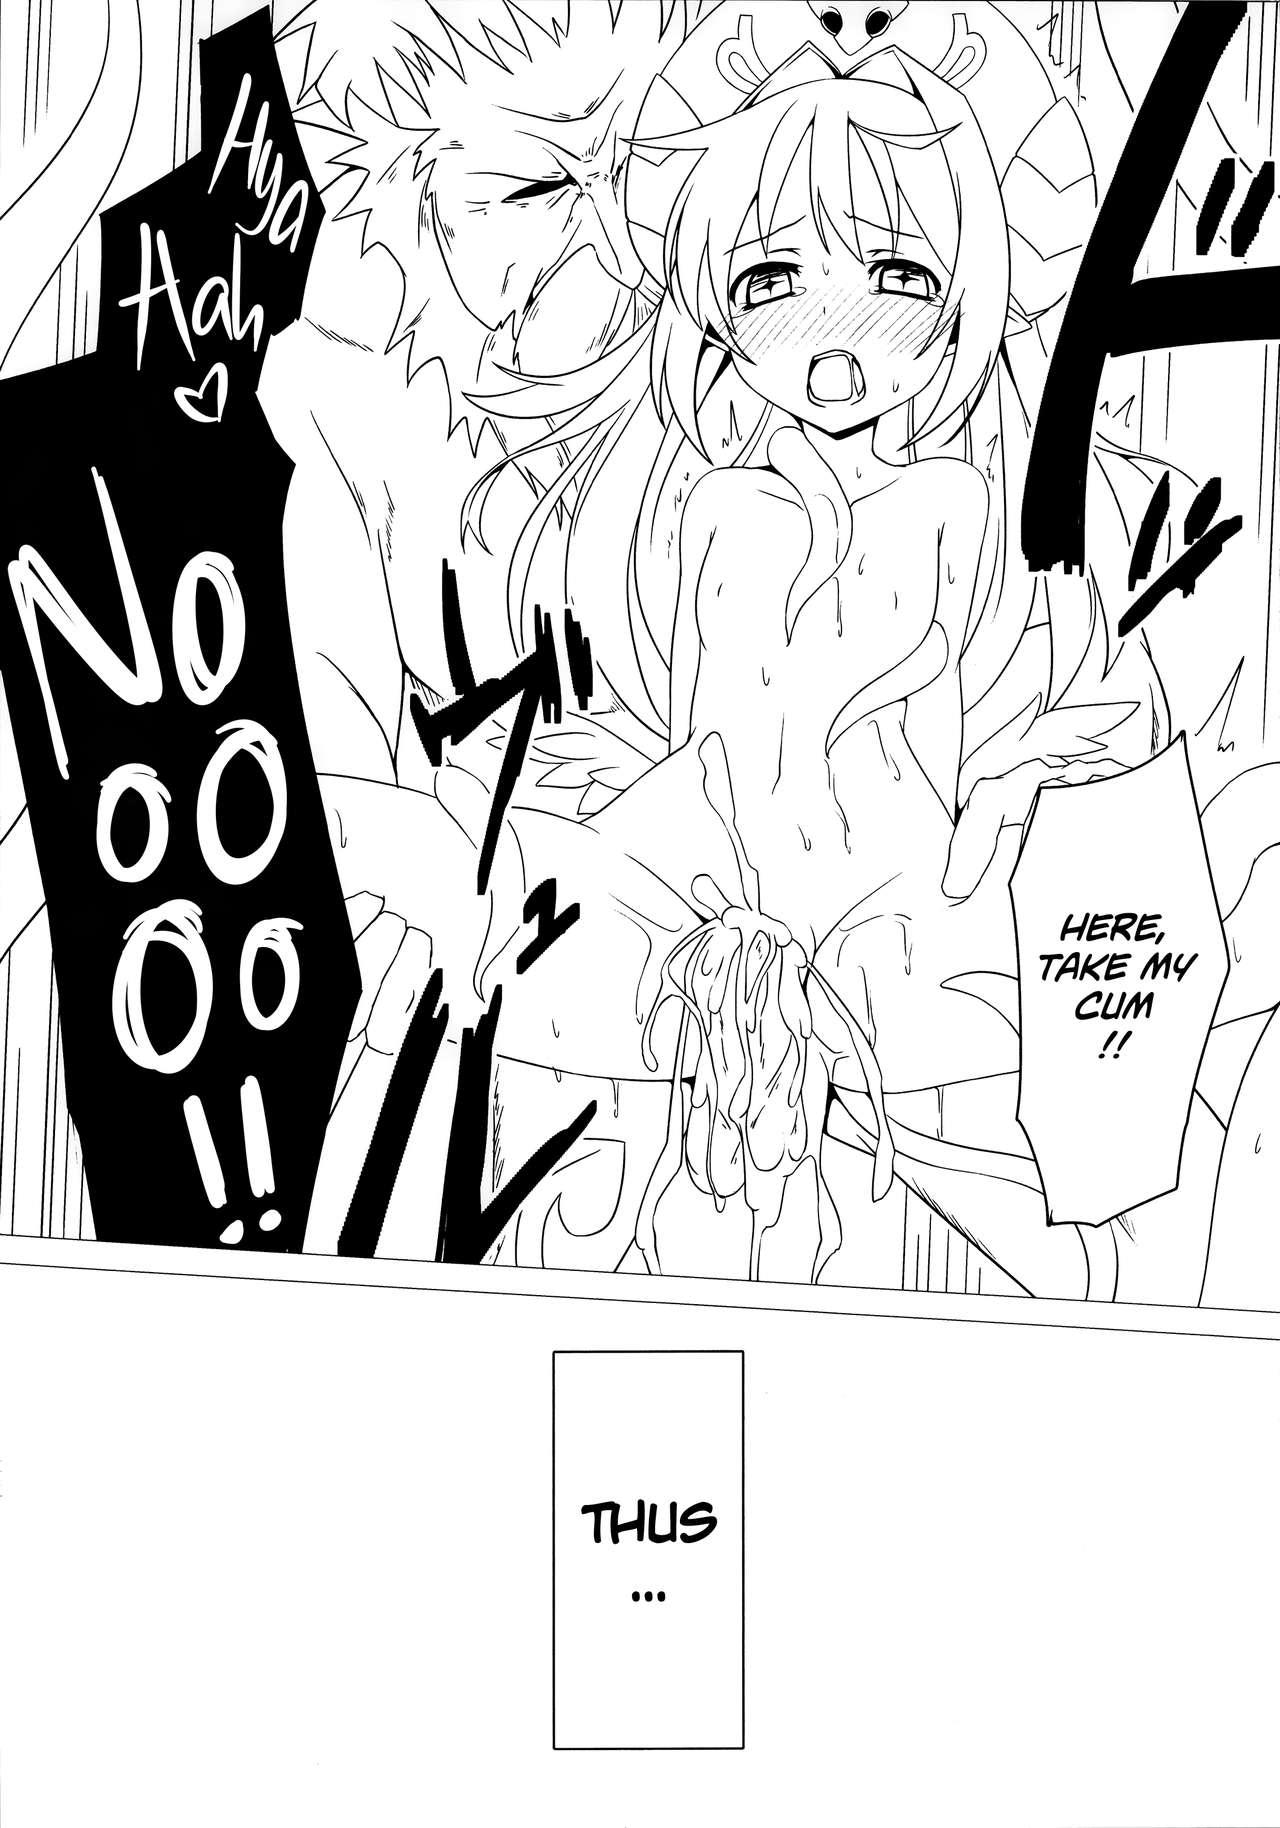 Oil Summoning Accident - Shinrabansho Tight Ass - Page 7